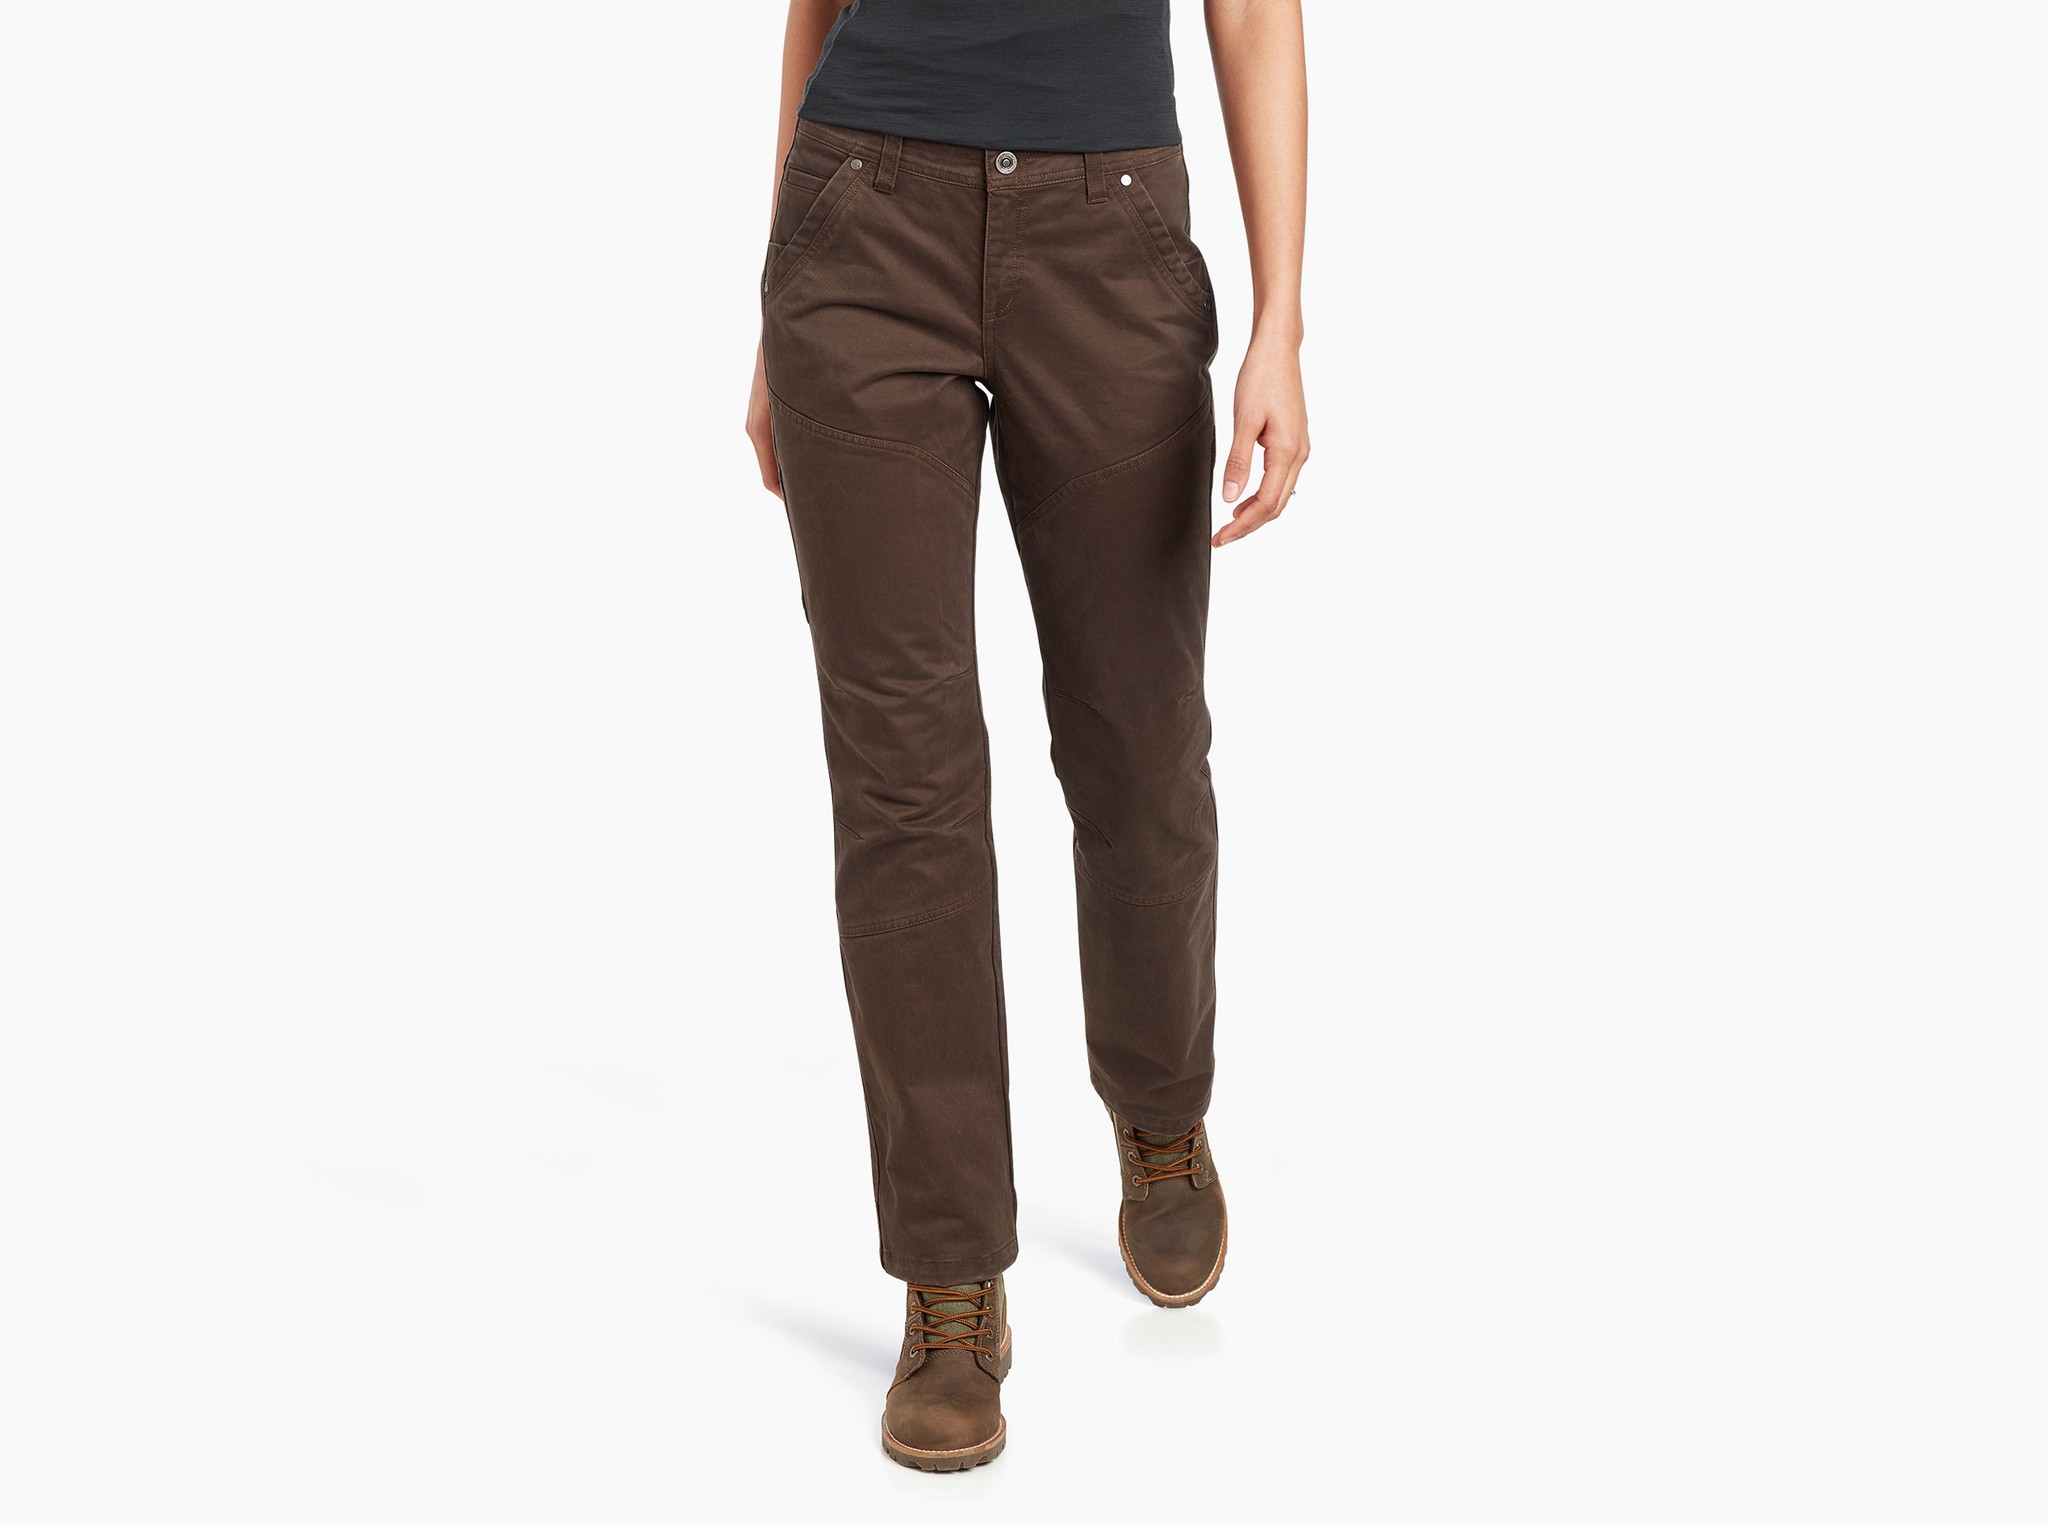 Rydr™ Pant in Women's Pants | KÜHL Clothing